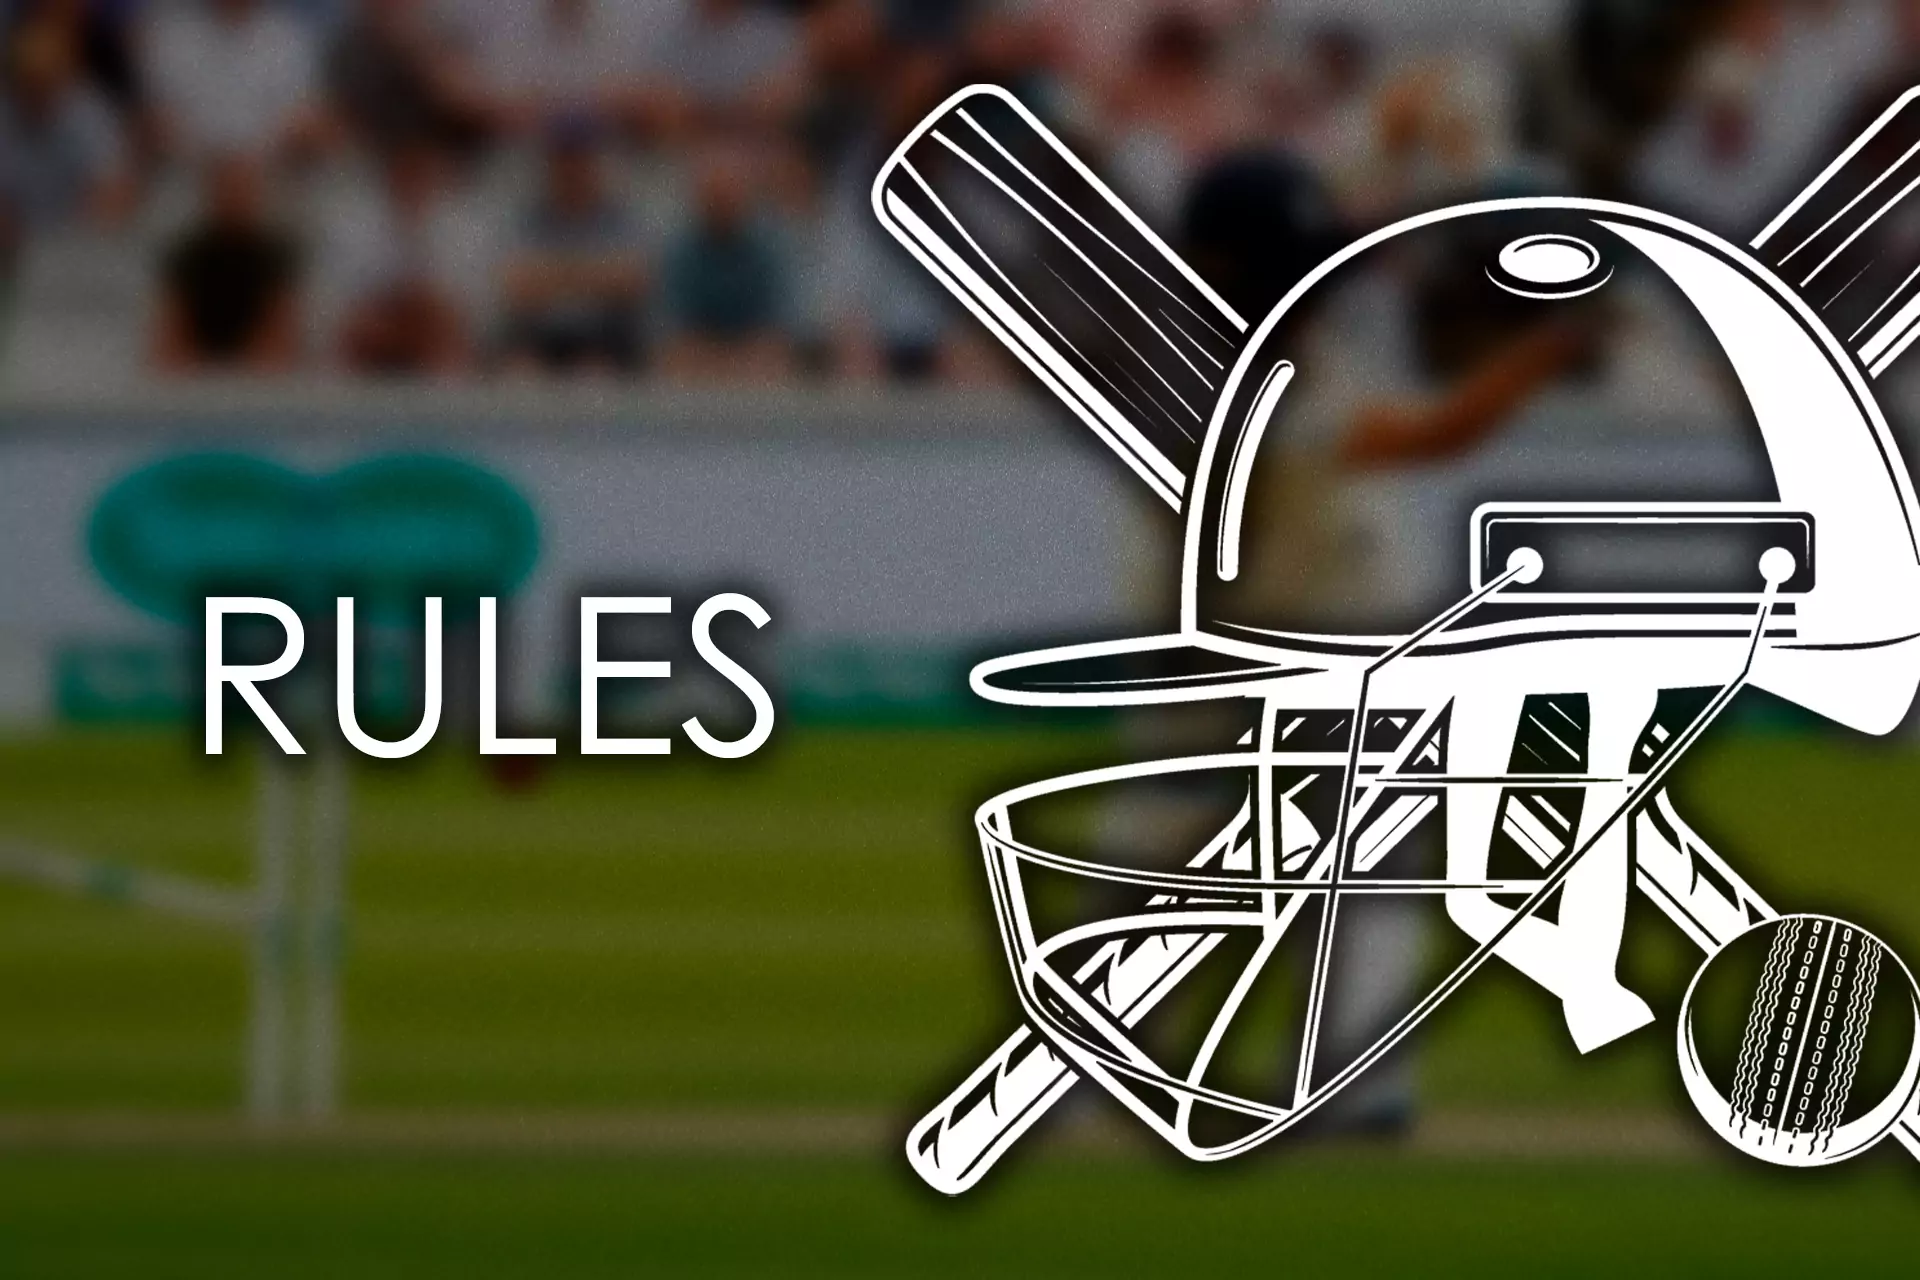 The Test cricket that is played for The Ashes Series has the oldest rules in the world.